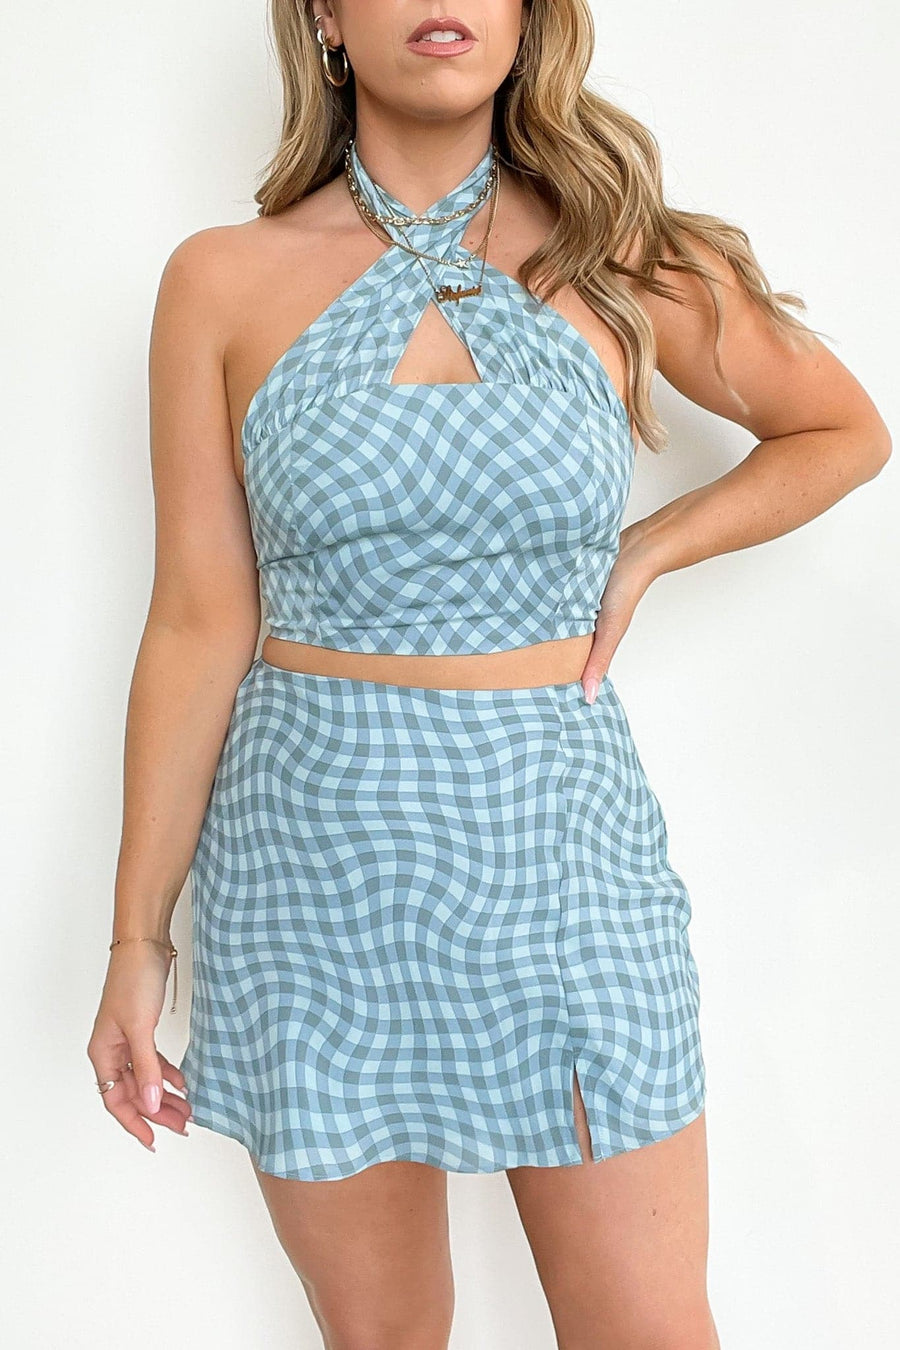 S / Teal/Blue Point for Me Check Print Skirt - FINAL SALE - Madison and Mallory